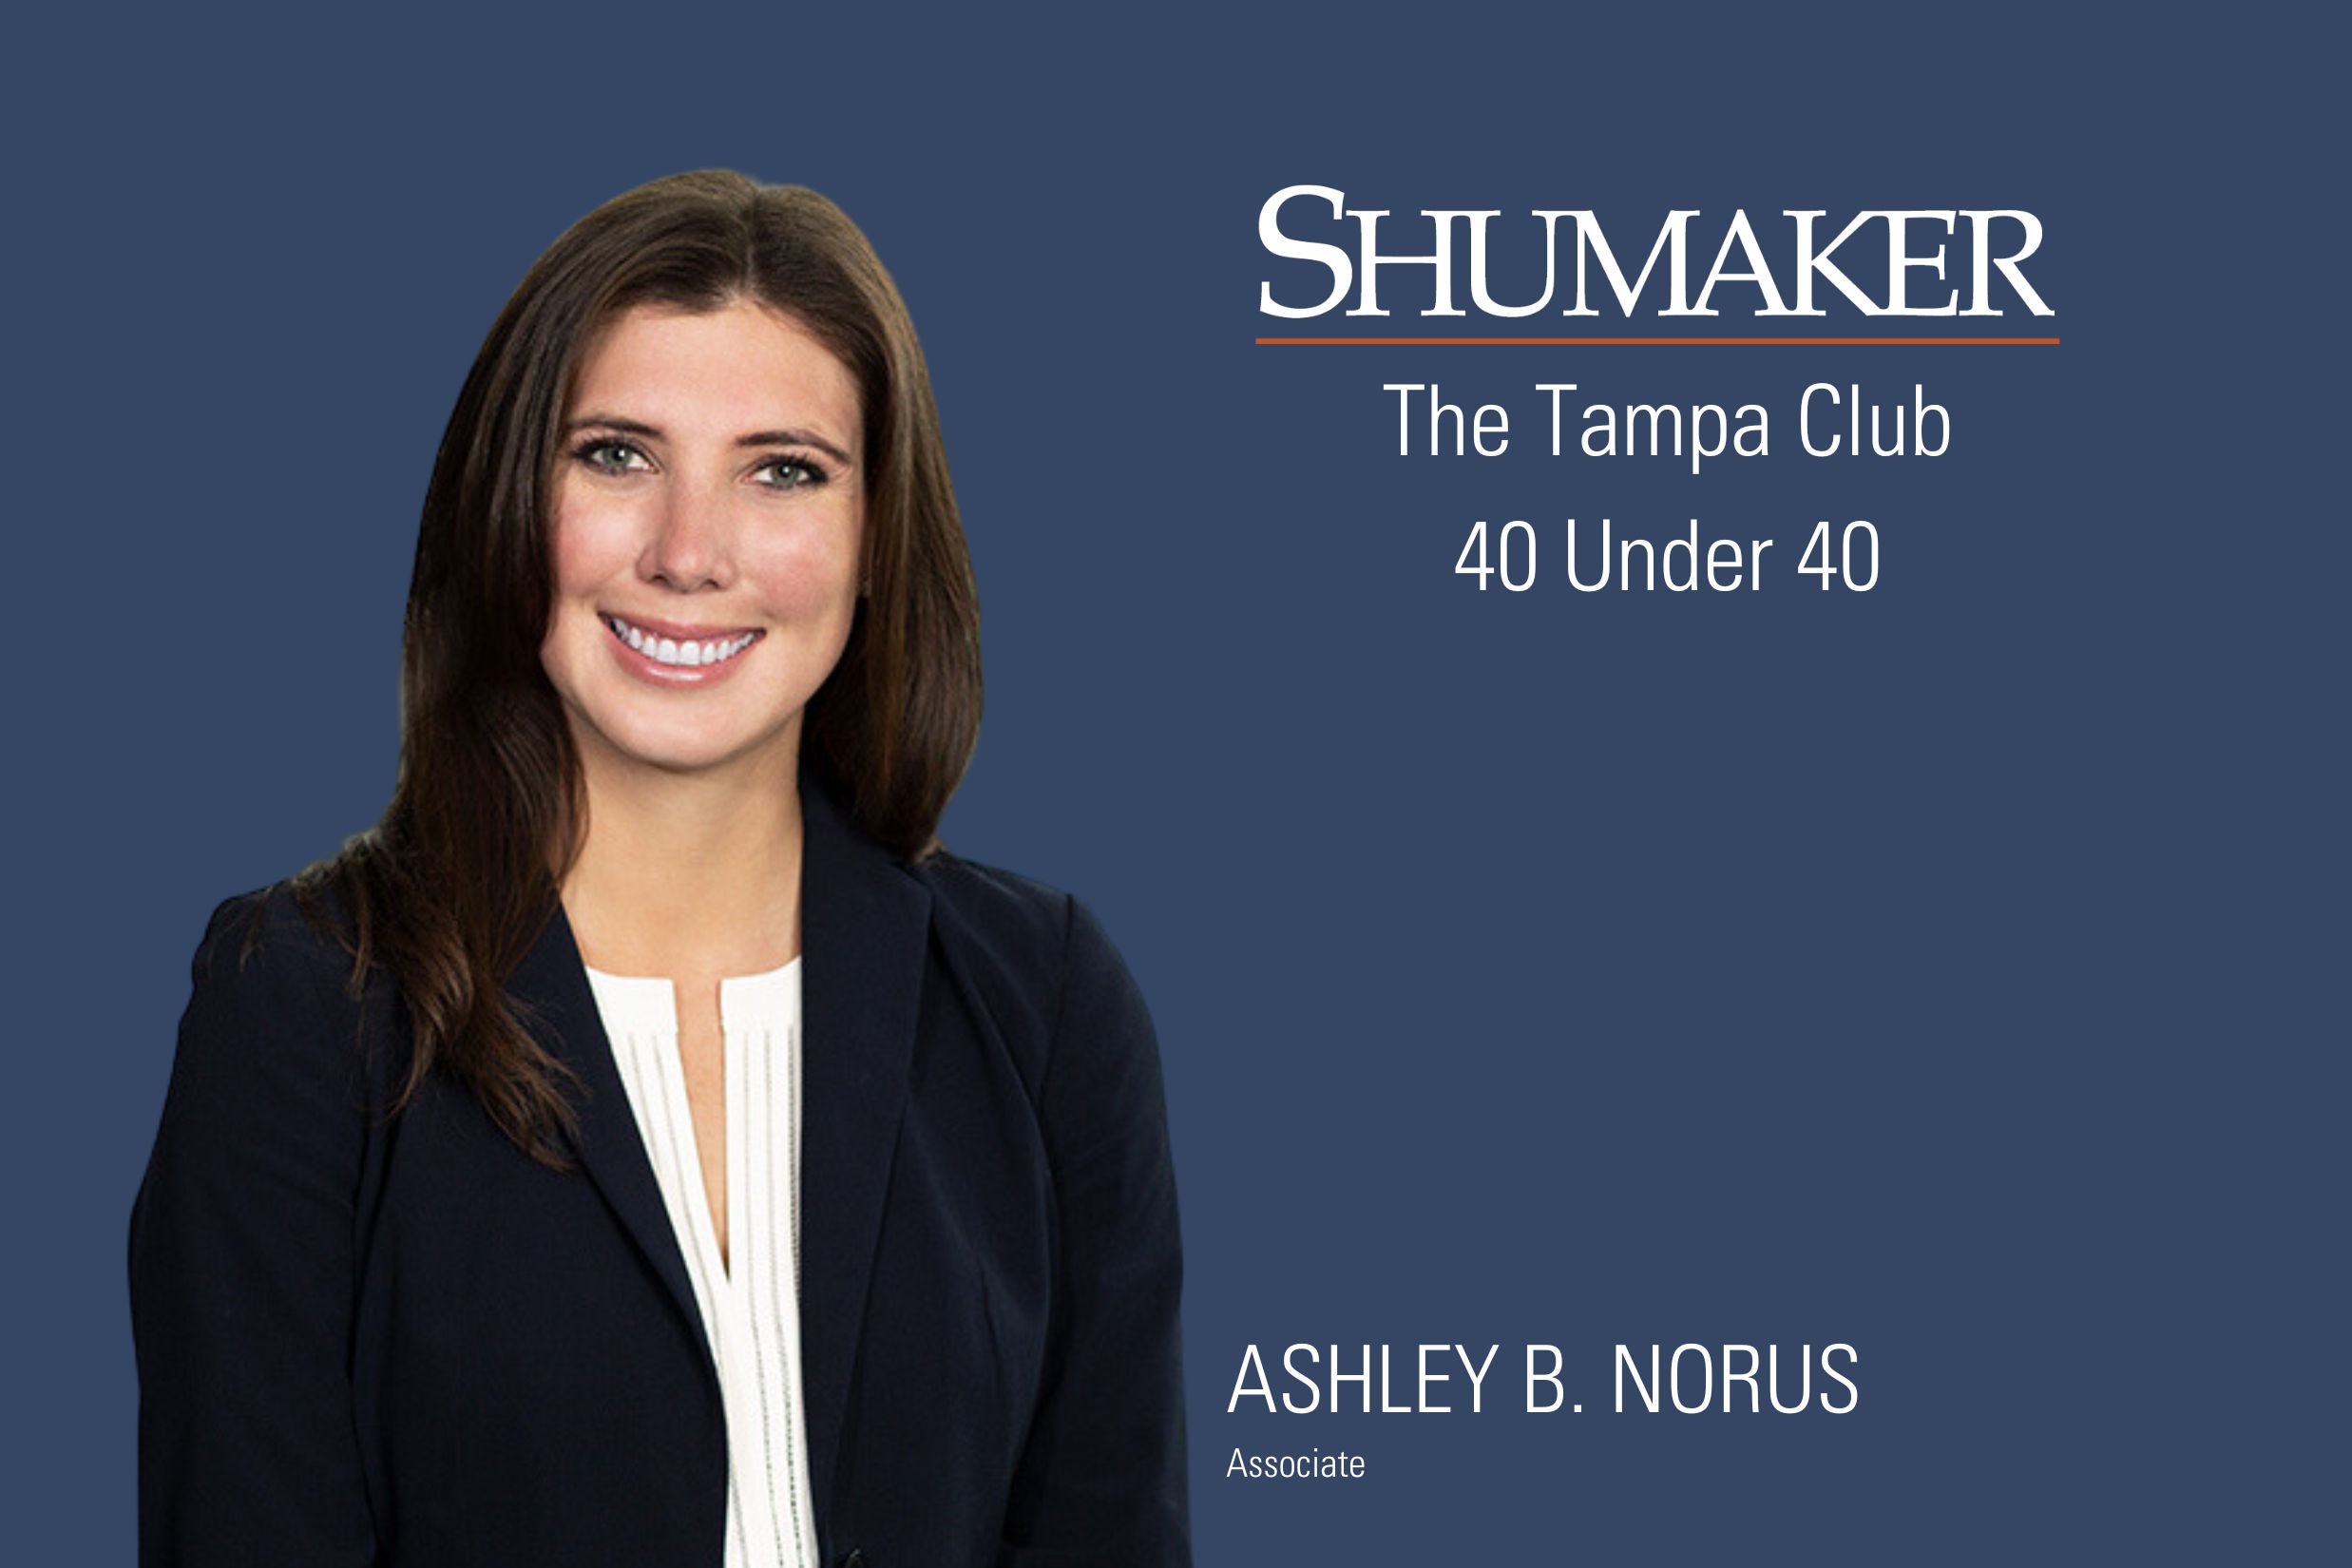 Tampa Club's 40 under 40 Honors Ashley B. Norus as a Distinguished Winner